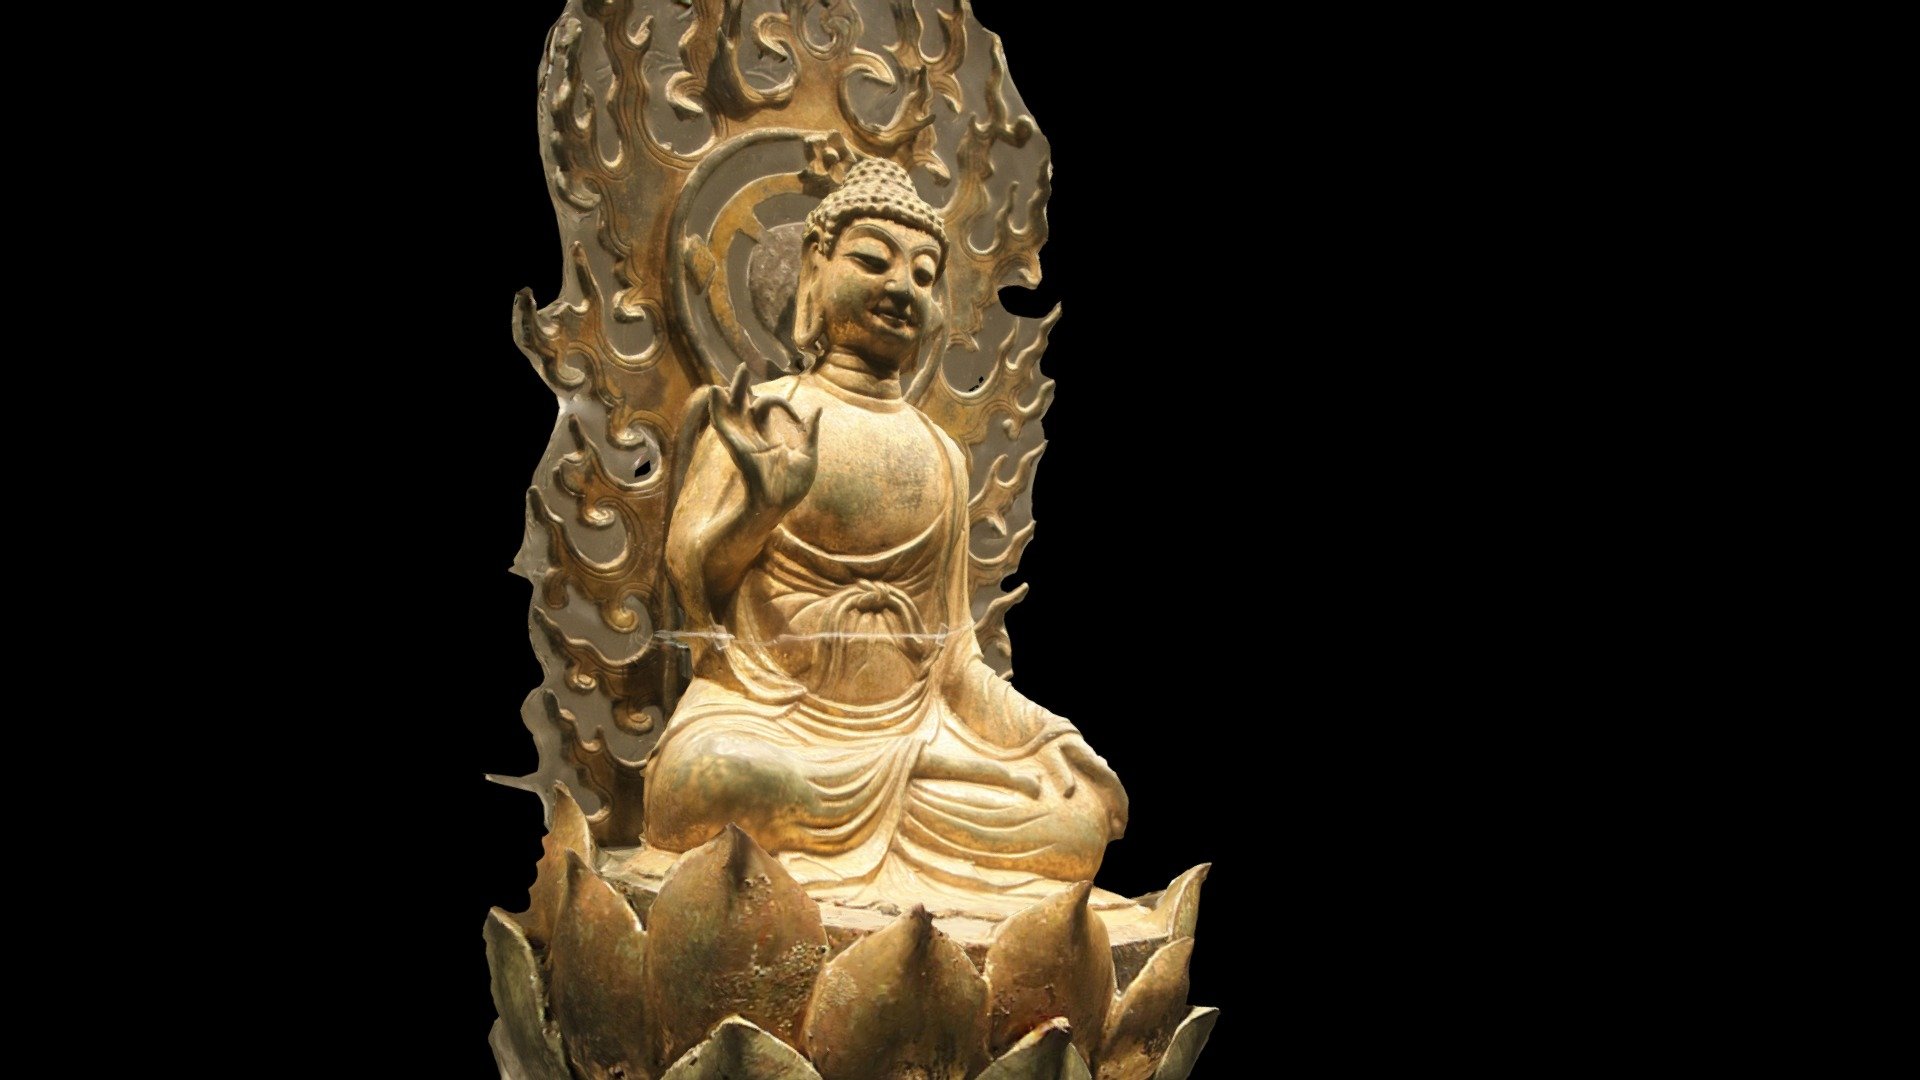 Gilt bronze statuette of Sakyamuni Buddha seated on a lotus throne. The gesture (mudra) of the right hand of the Buddha suggests he is preaching the Buddhist law. H. 68 centimeters (base included). Dated late Tang or Five Dynasties (10th century). Excavated from the crypt of the Thunder Peak Pagoda (Leifengta) in Hangzhou, China. Now exhibited at the Zhejiang Provincial Museum Gushan Branch in the same city 3d model